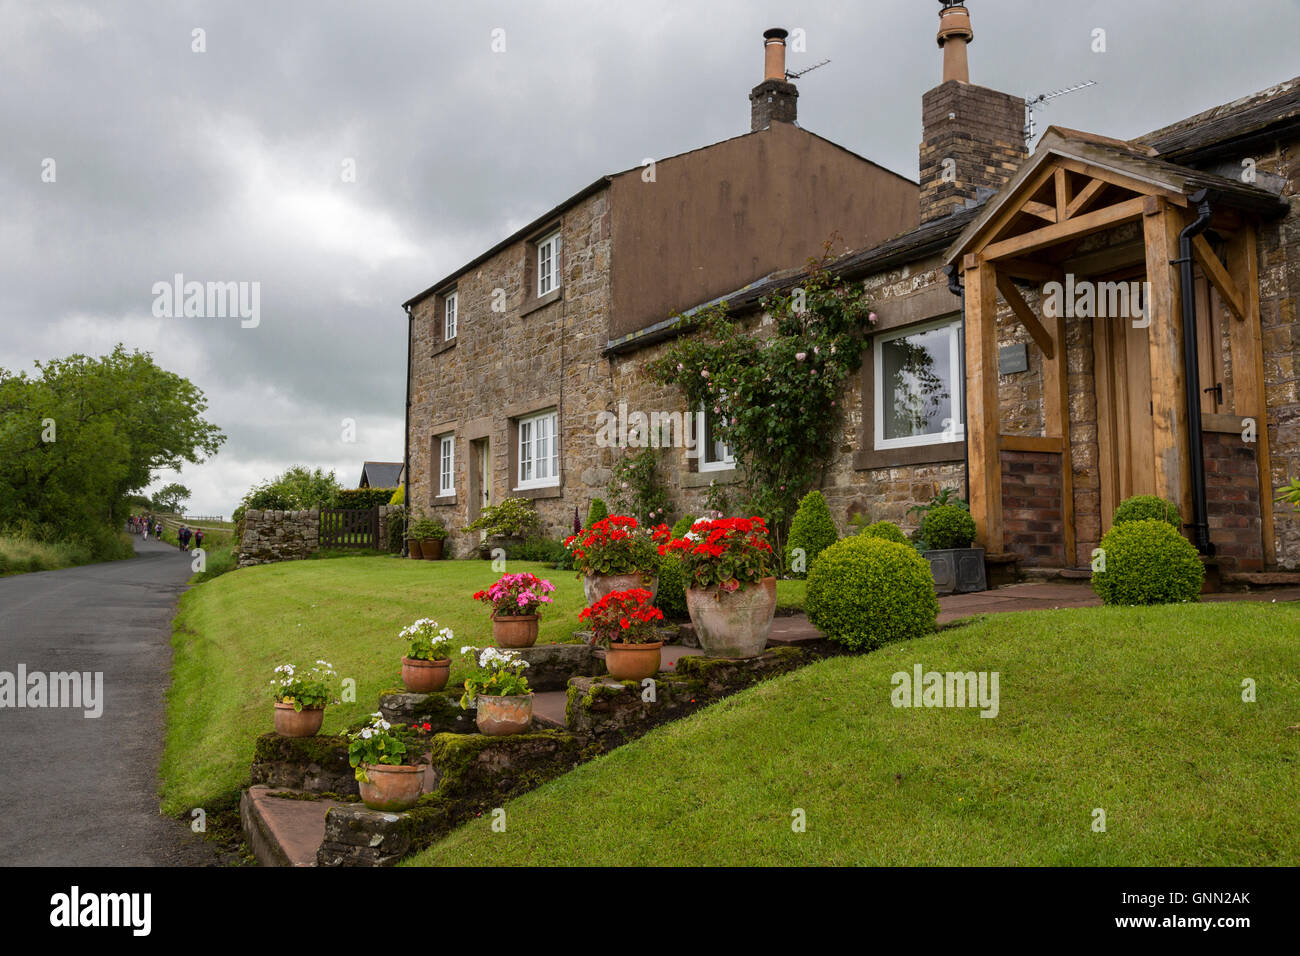 Banks, Cumbria, England, UK.  Village House on the Route of Hadrian's Wall Footpath. Stock Photo